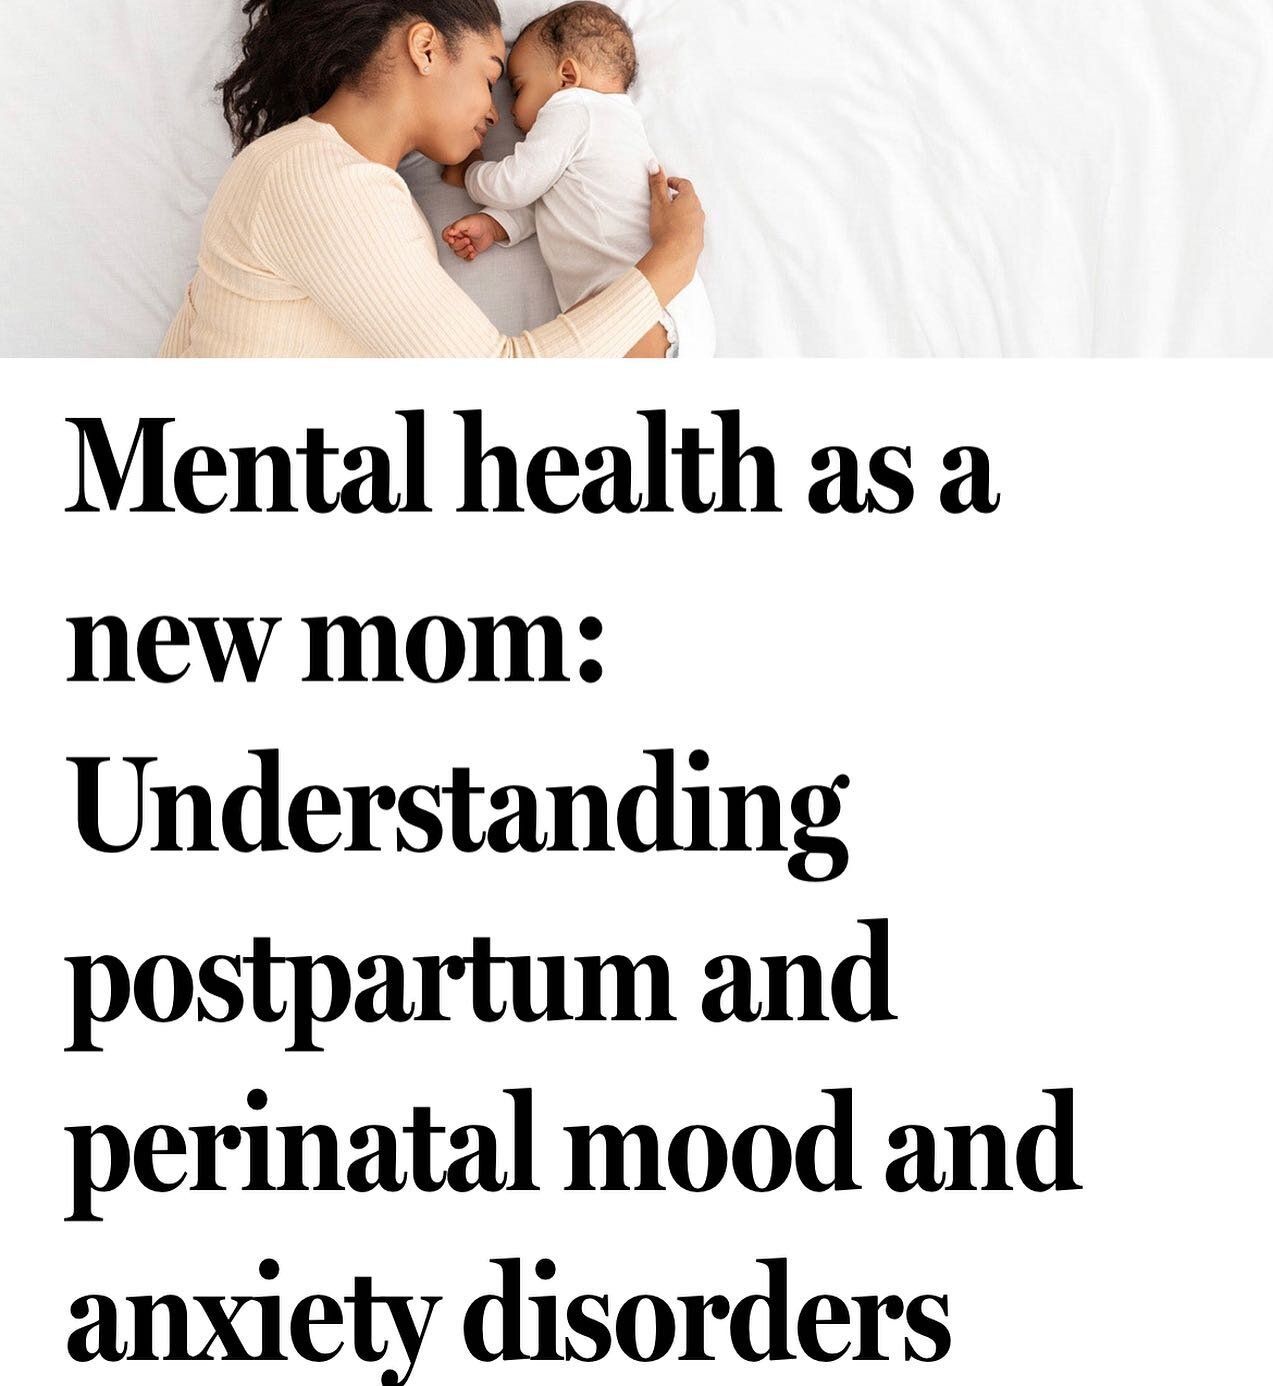 Happy to have contributed to this important piece on #motherhood and #mentalhealth. Thank you to @bostonglobe and @point32health for shining a light on #maternalmentalhealth. Link to article in bio.